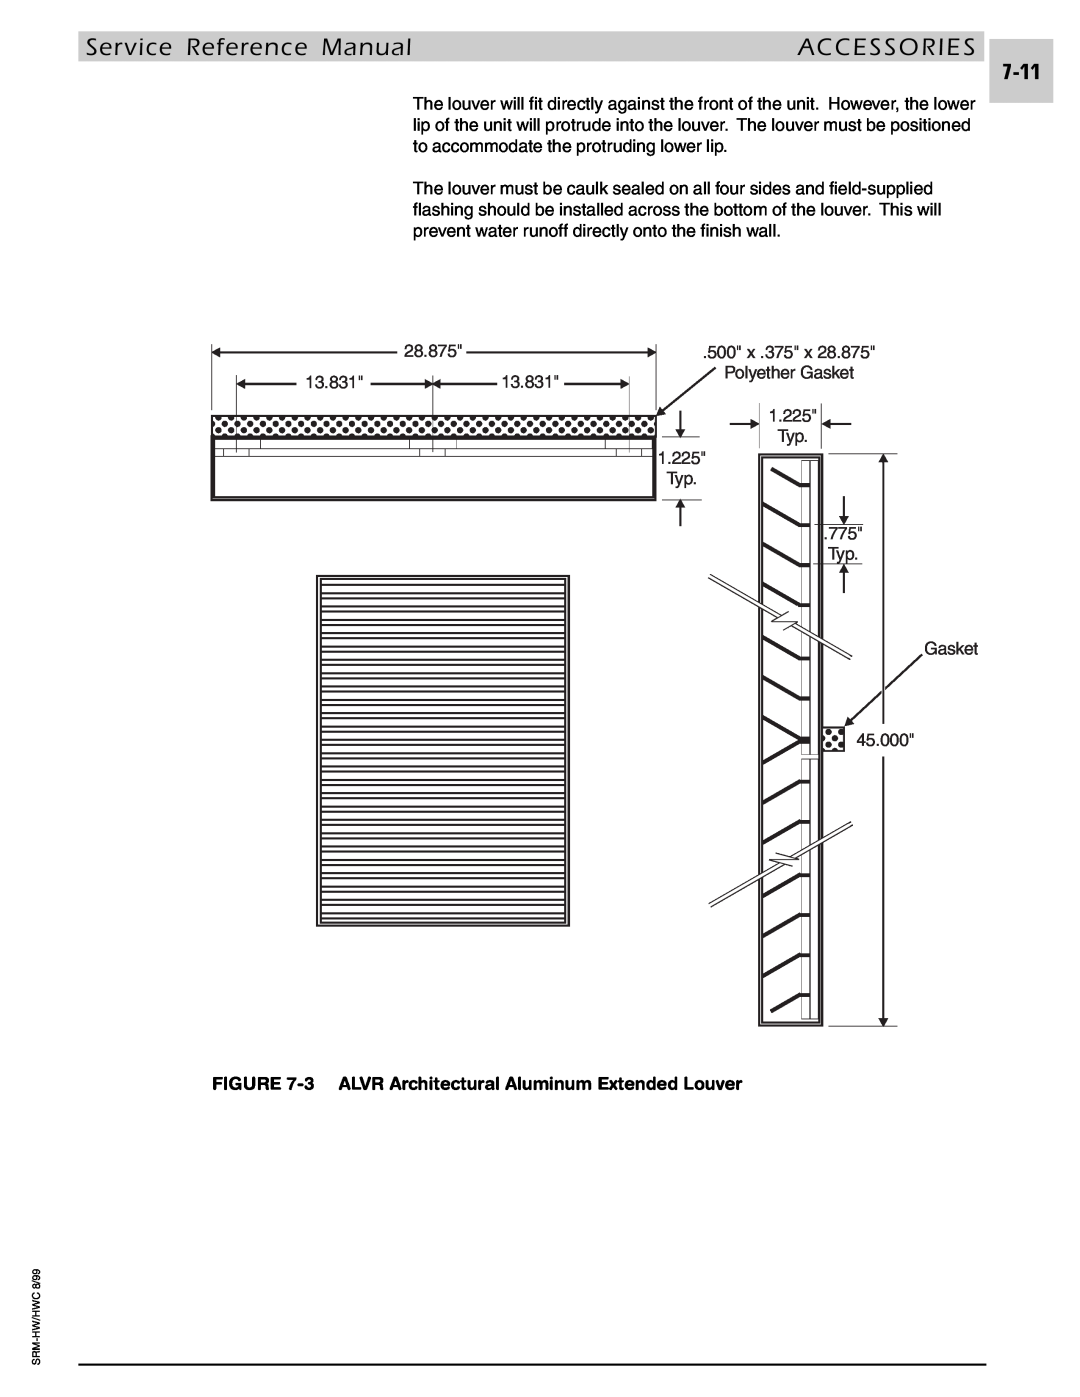 Armstrong World Industries 203, 243 Service Reference Manual, Accessories, 3 ALVR Architectural Aluminum Extended Louver 